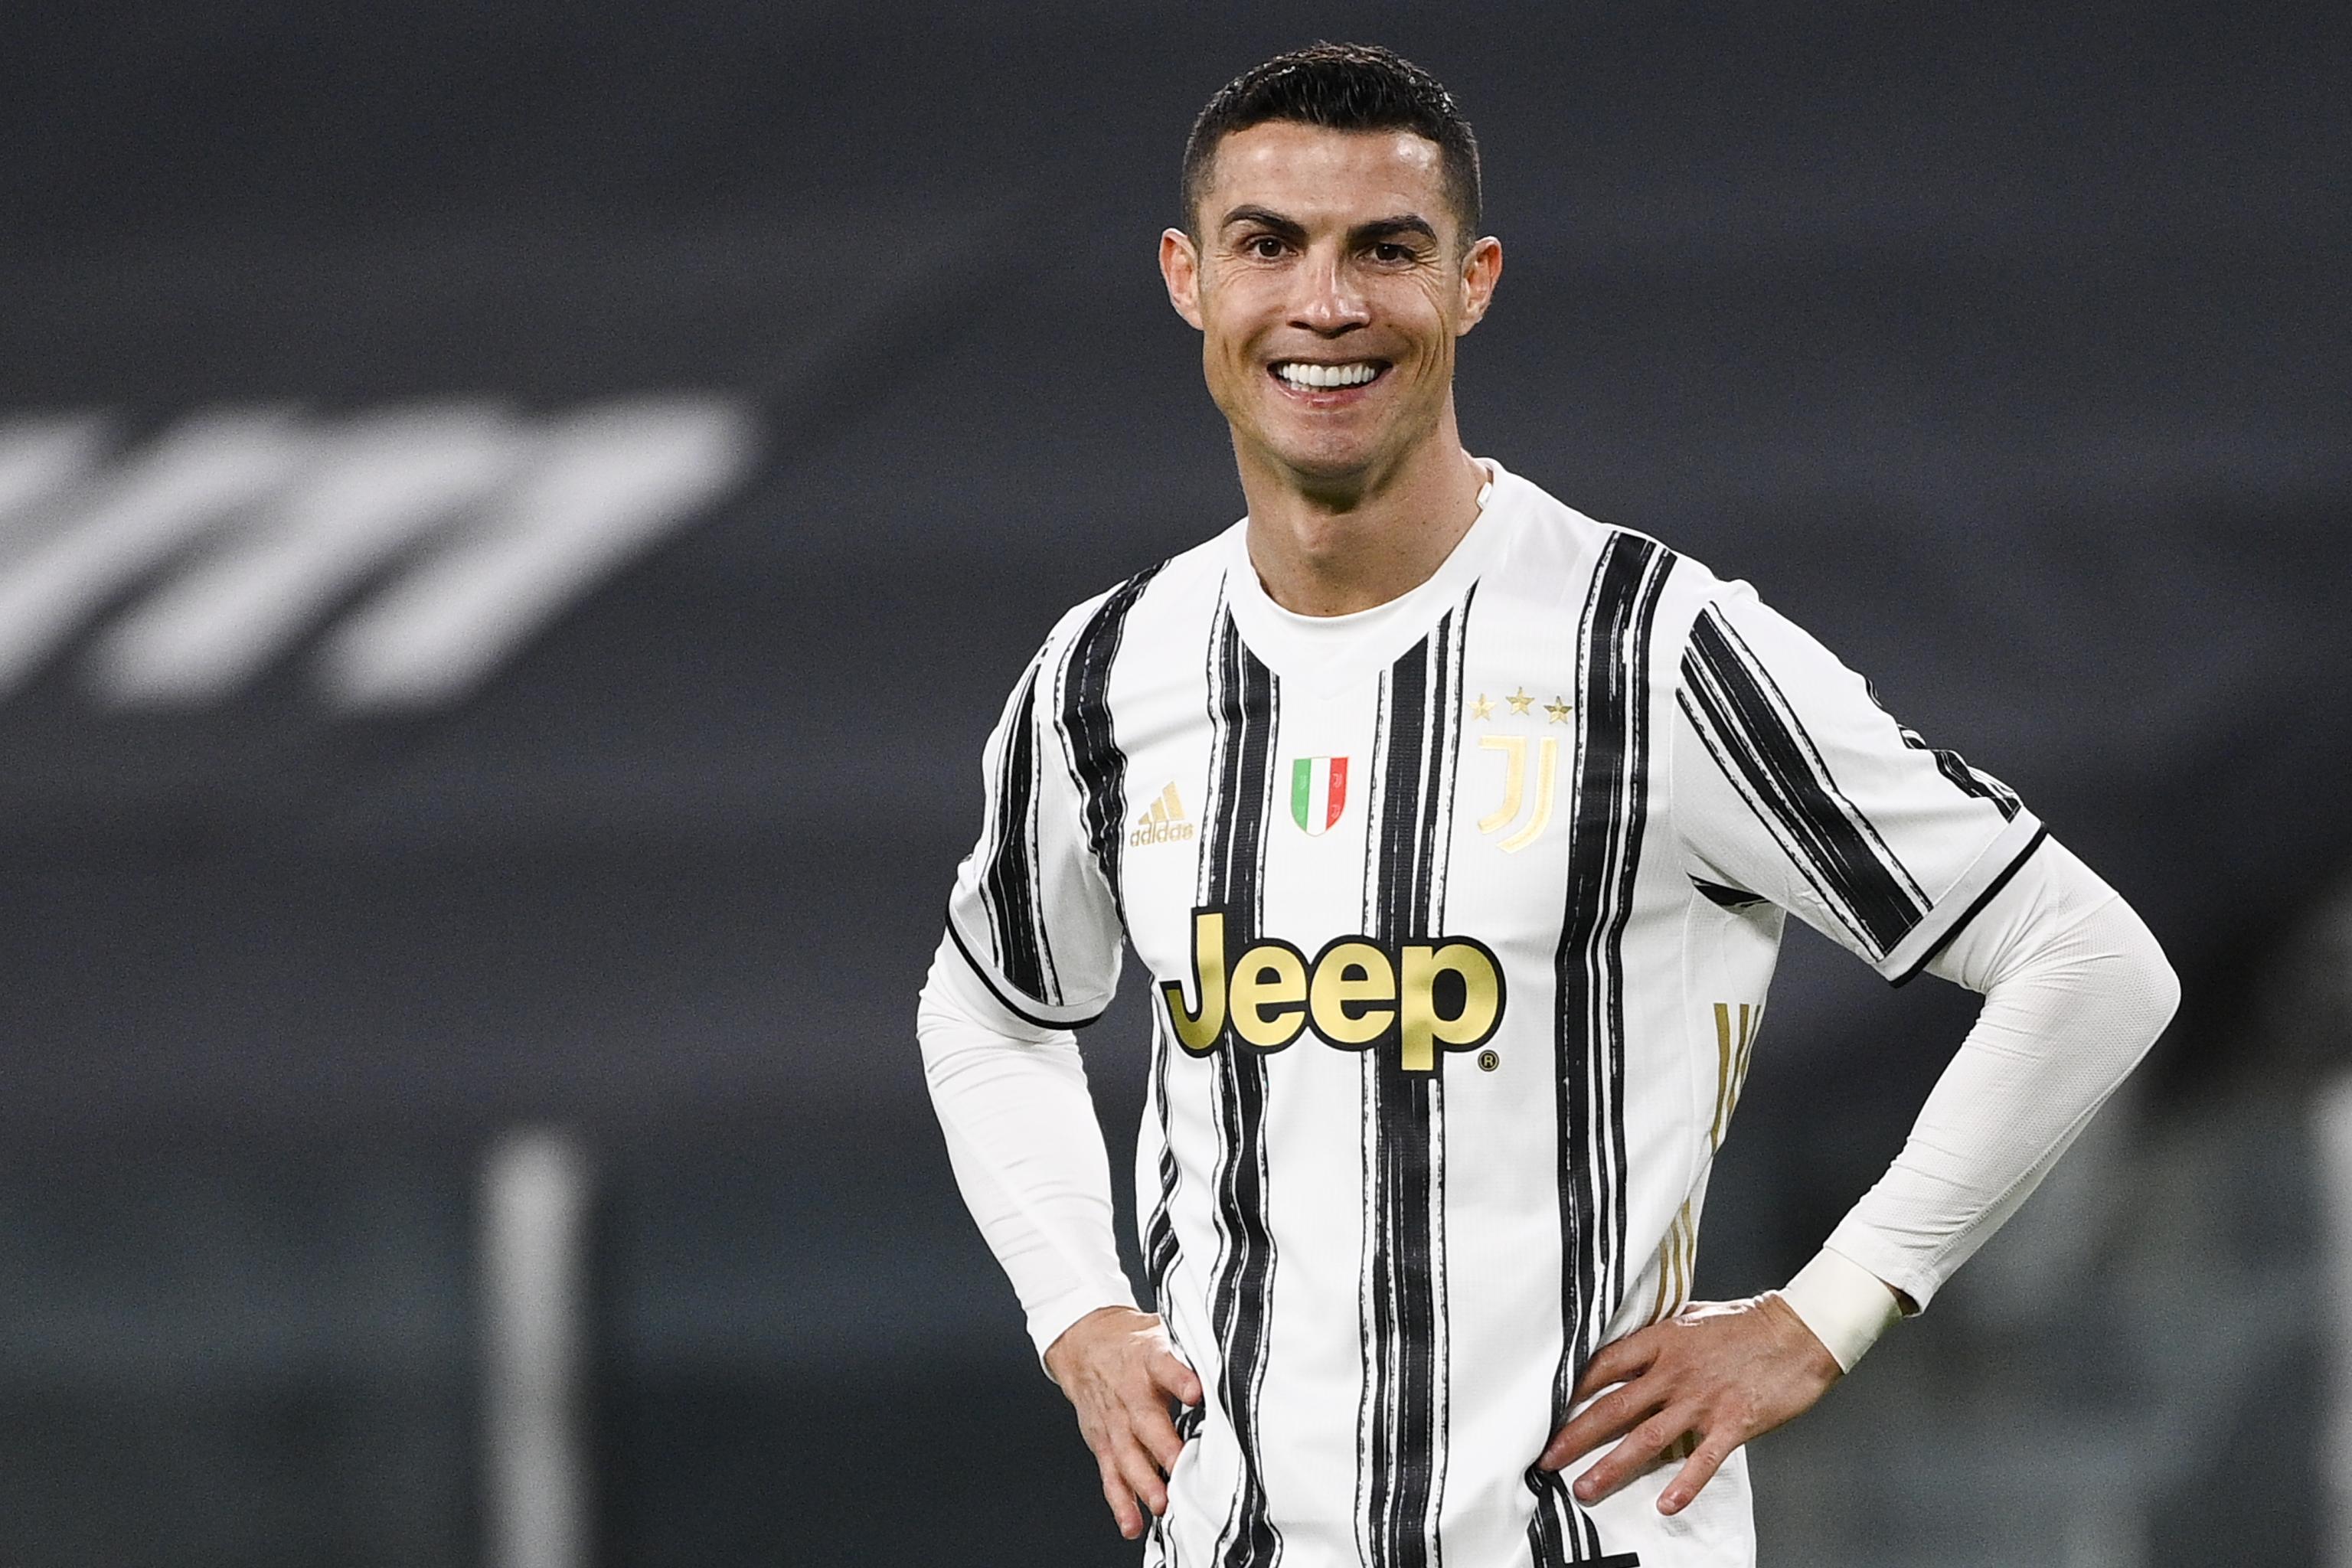 Cristiano Ronaldo 1st Person In World To Surpass 500m Social Media Followers Bleacher Report Latest News Videos And Highlights